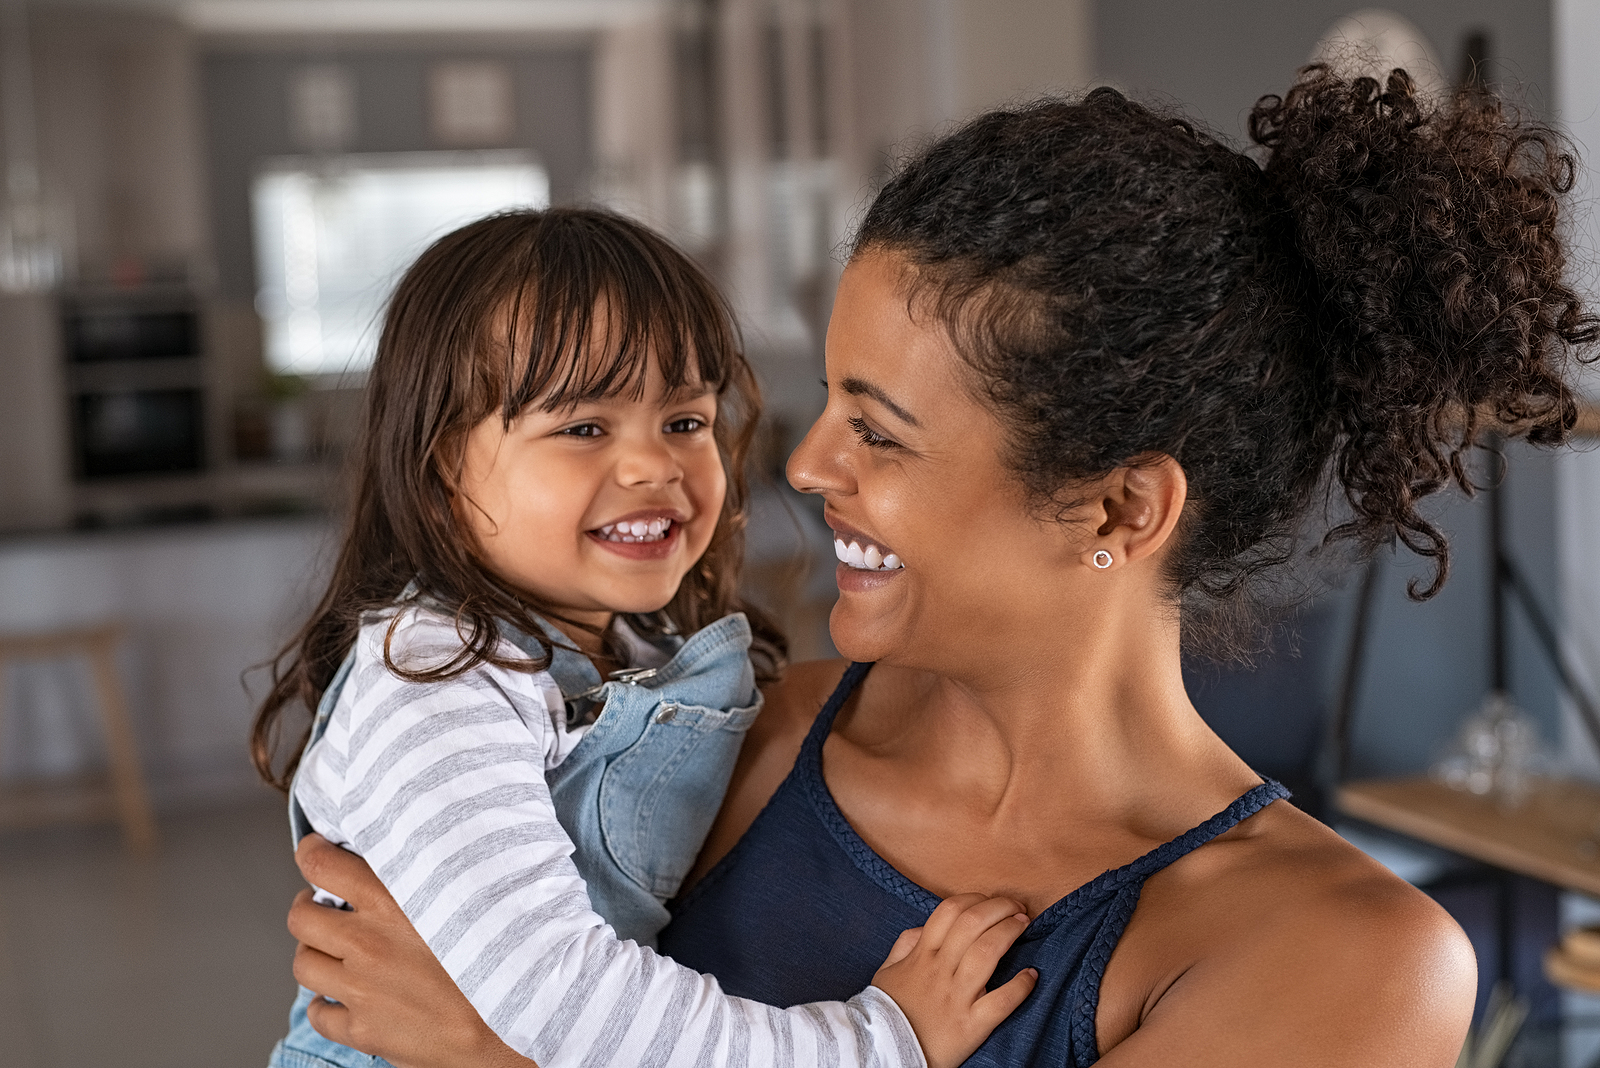 Mom holding smiling daughter. Calling all overwhelmed moms, stressed working moms, and new parents, we get you're doing it all. You need support too! Begin therapy for moms in Detroit, MI or therapy for new moms today for support. Call now!